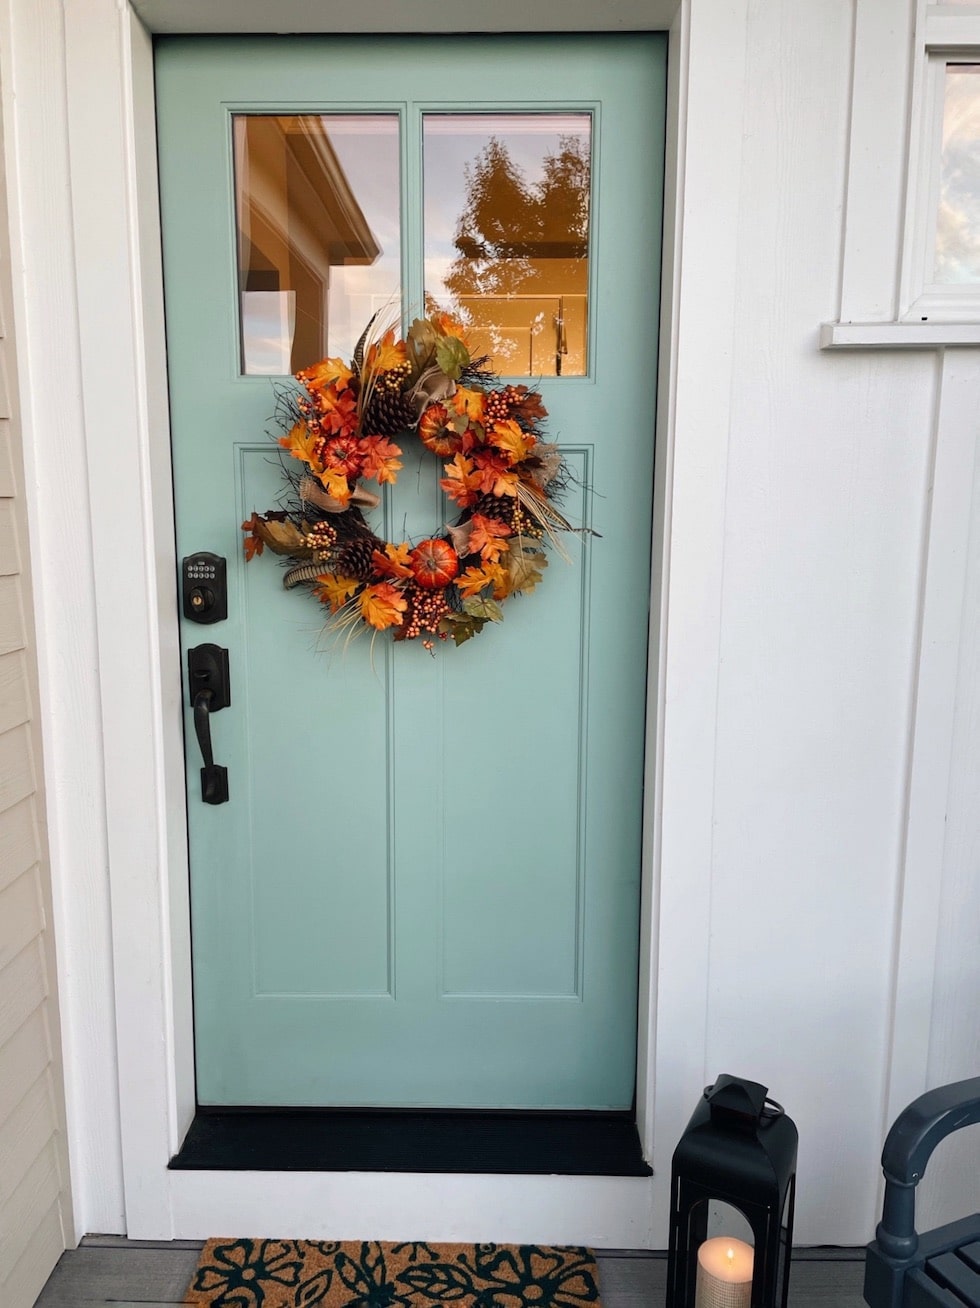 Decorating Our New Front Porch and Entry for Fall